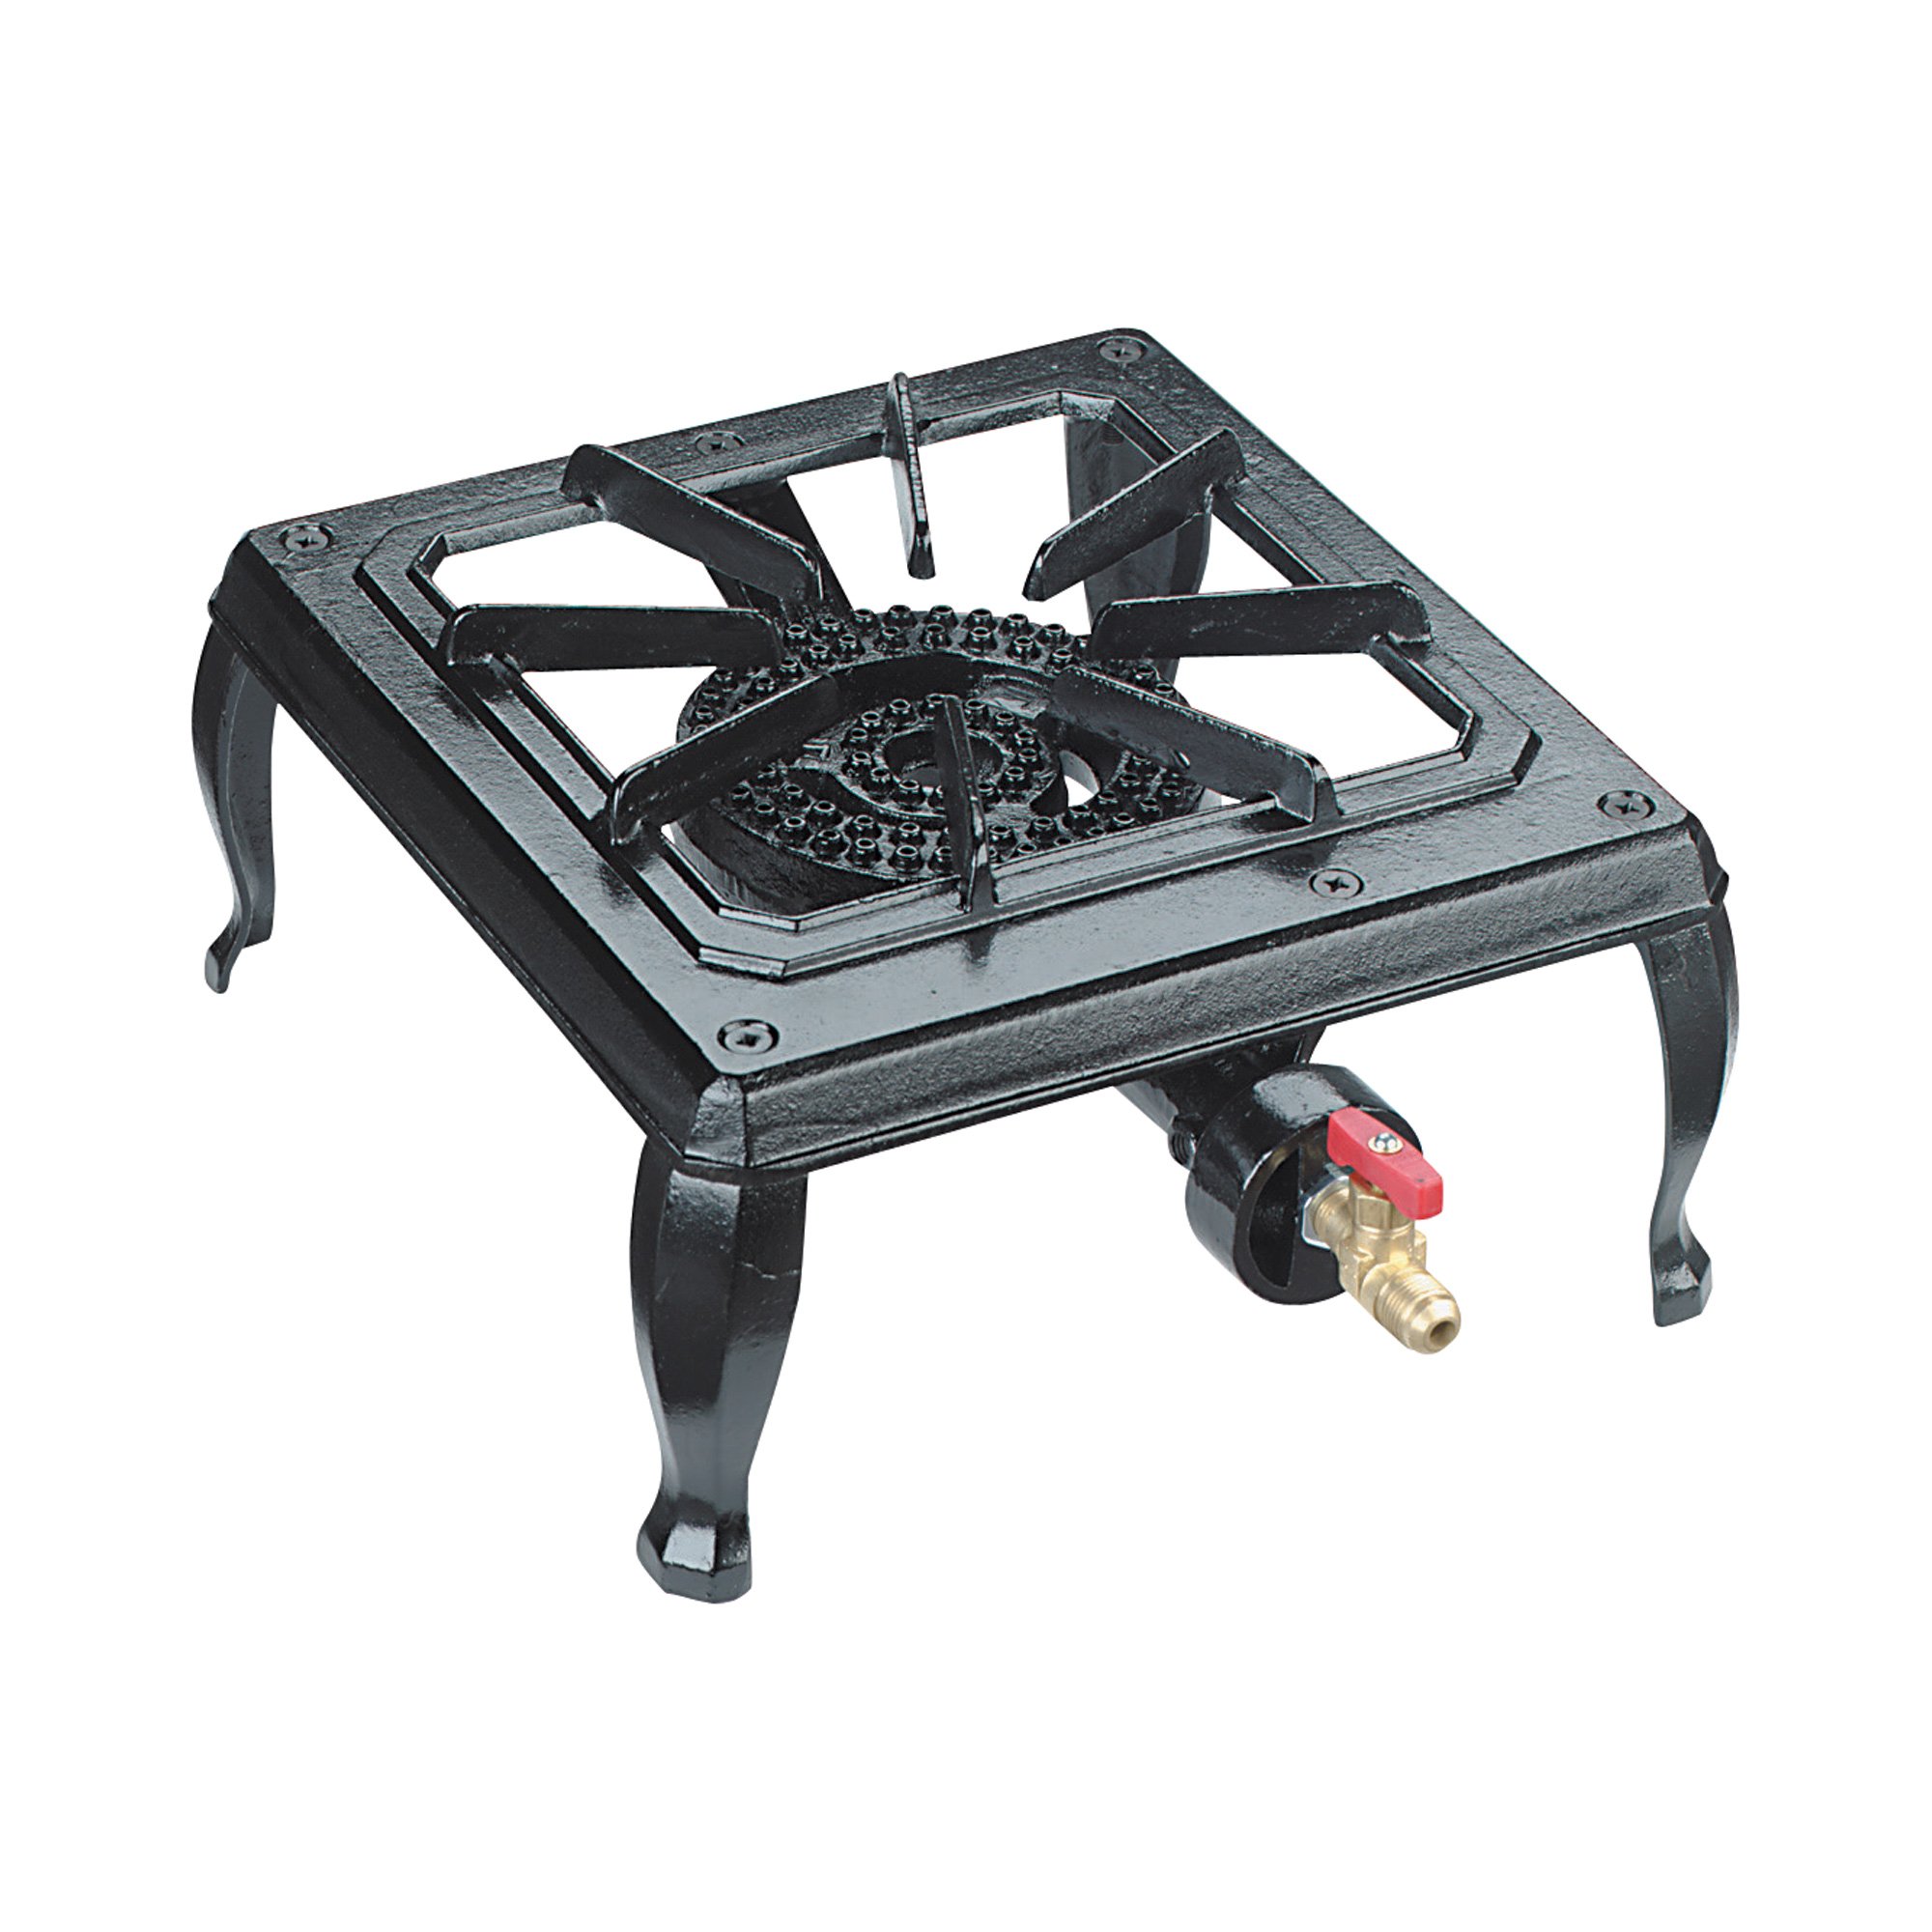 Costway 2-in-1 Portable Propane Grill 2 Burner Camping Gas Stove